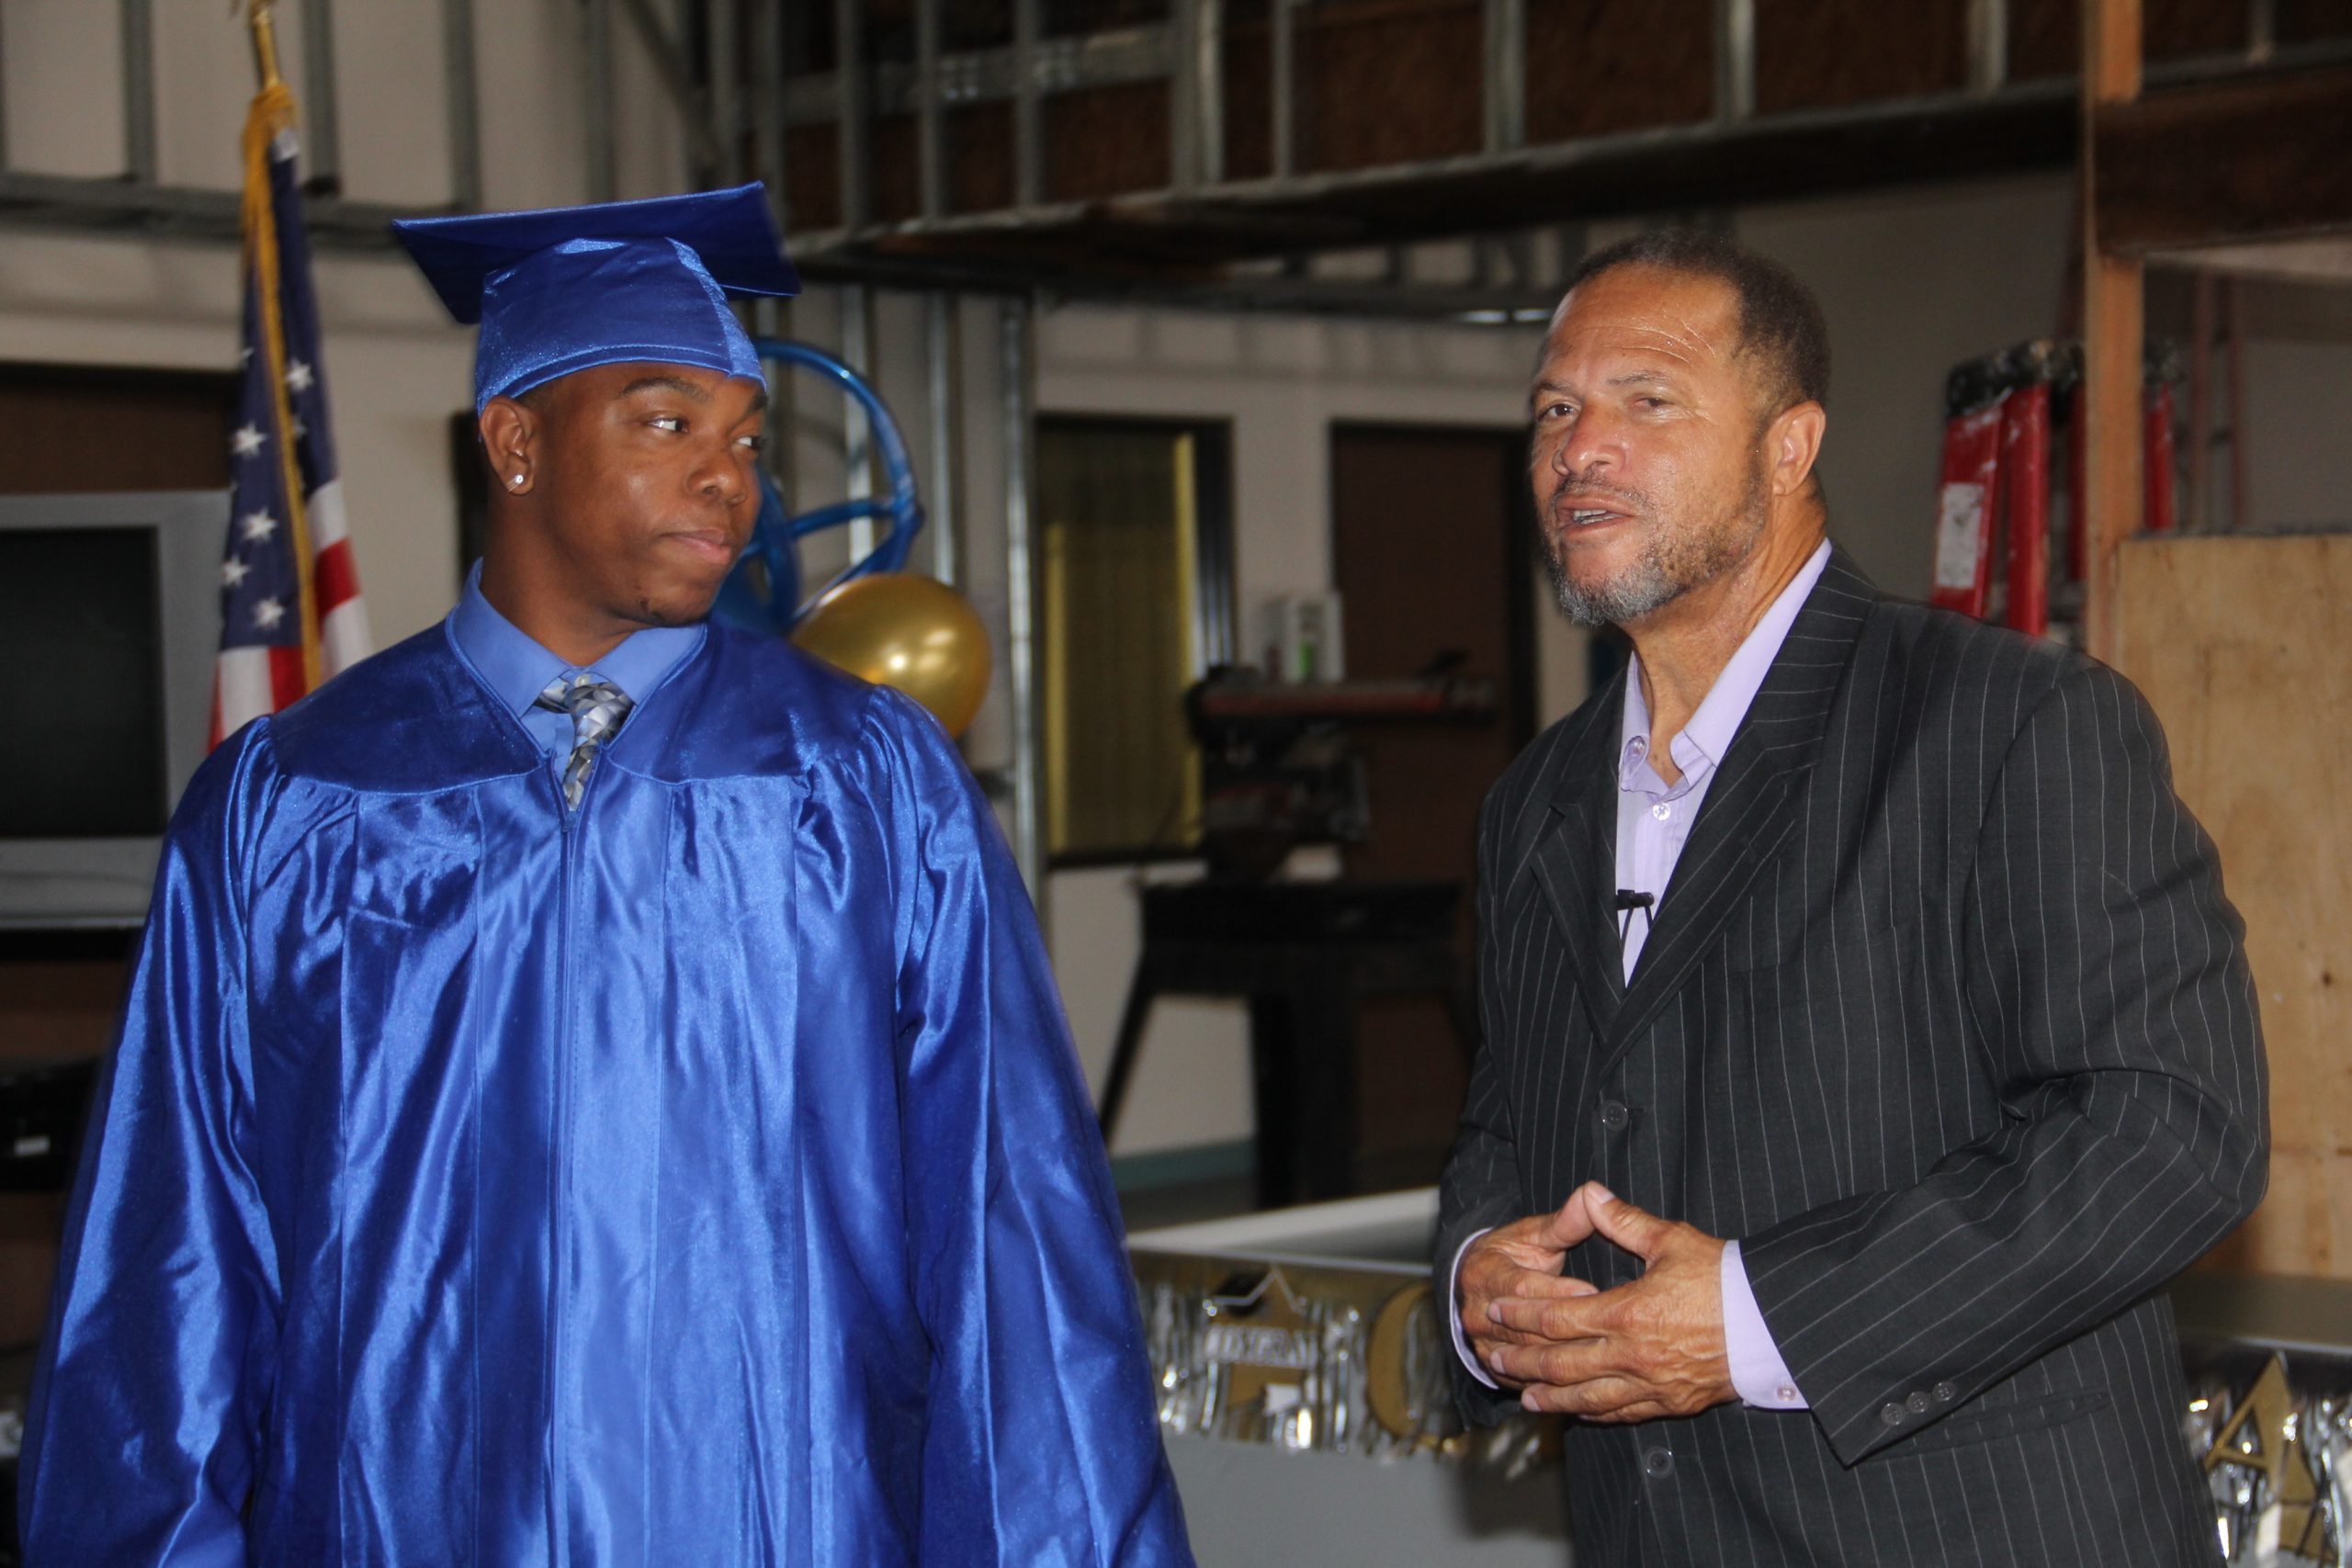 The Black Contractors Association Celebrates Their YouthBuild graduates as They Move on To College and Employment